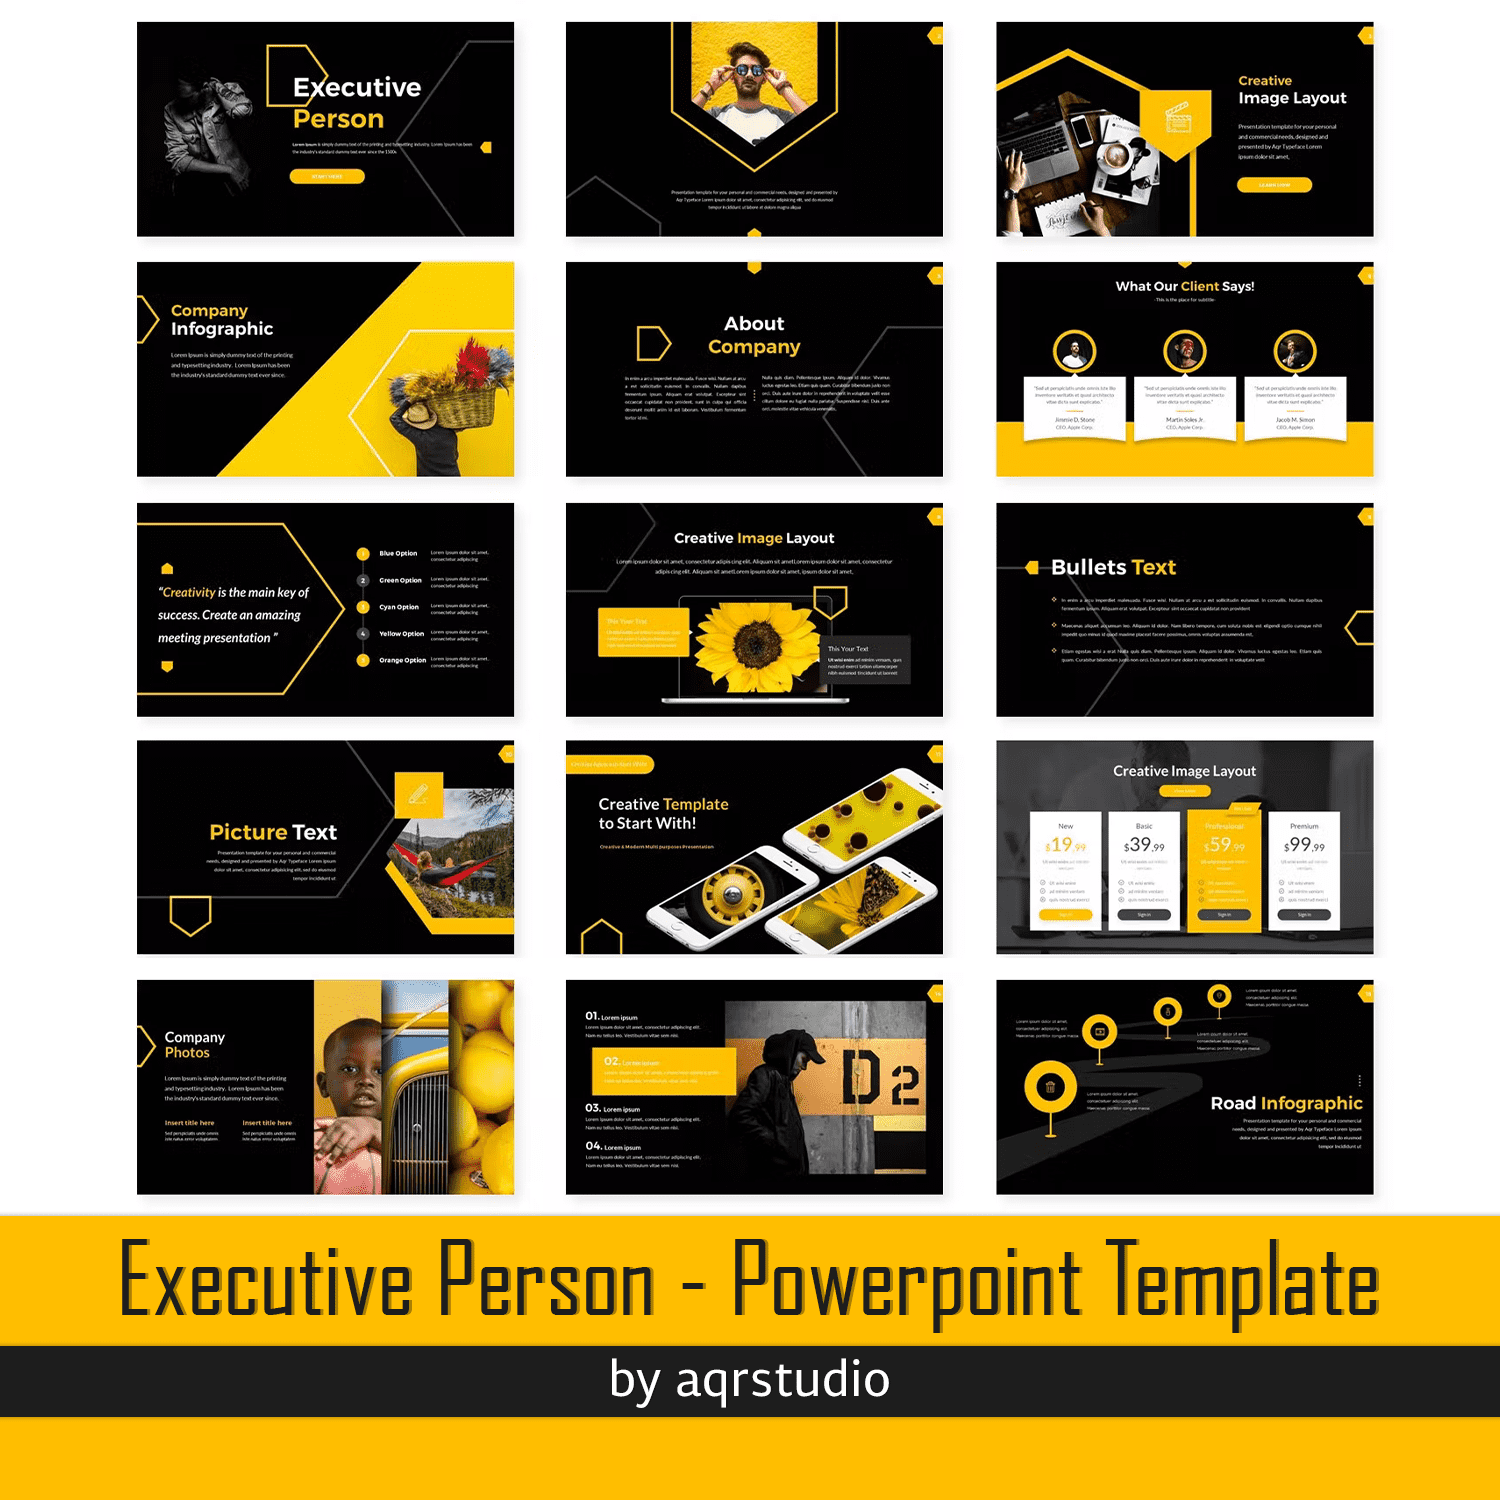 Executive - Powerpoint Template Cover.